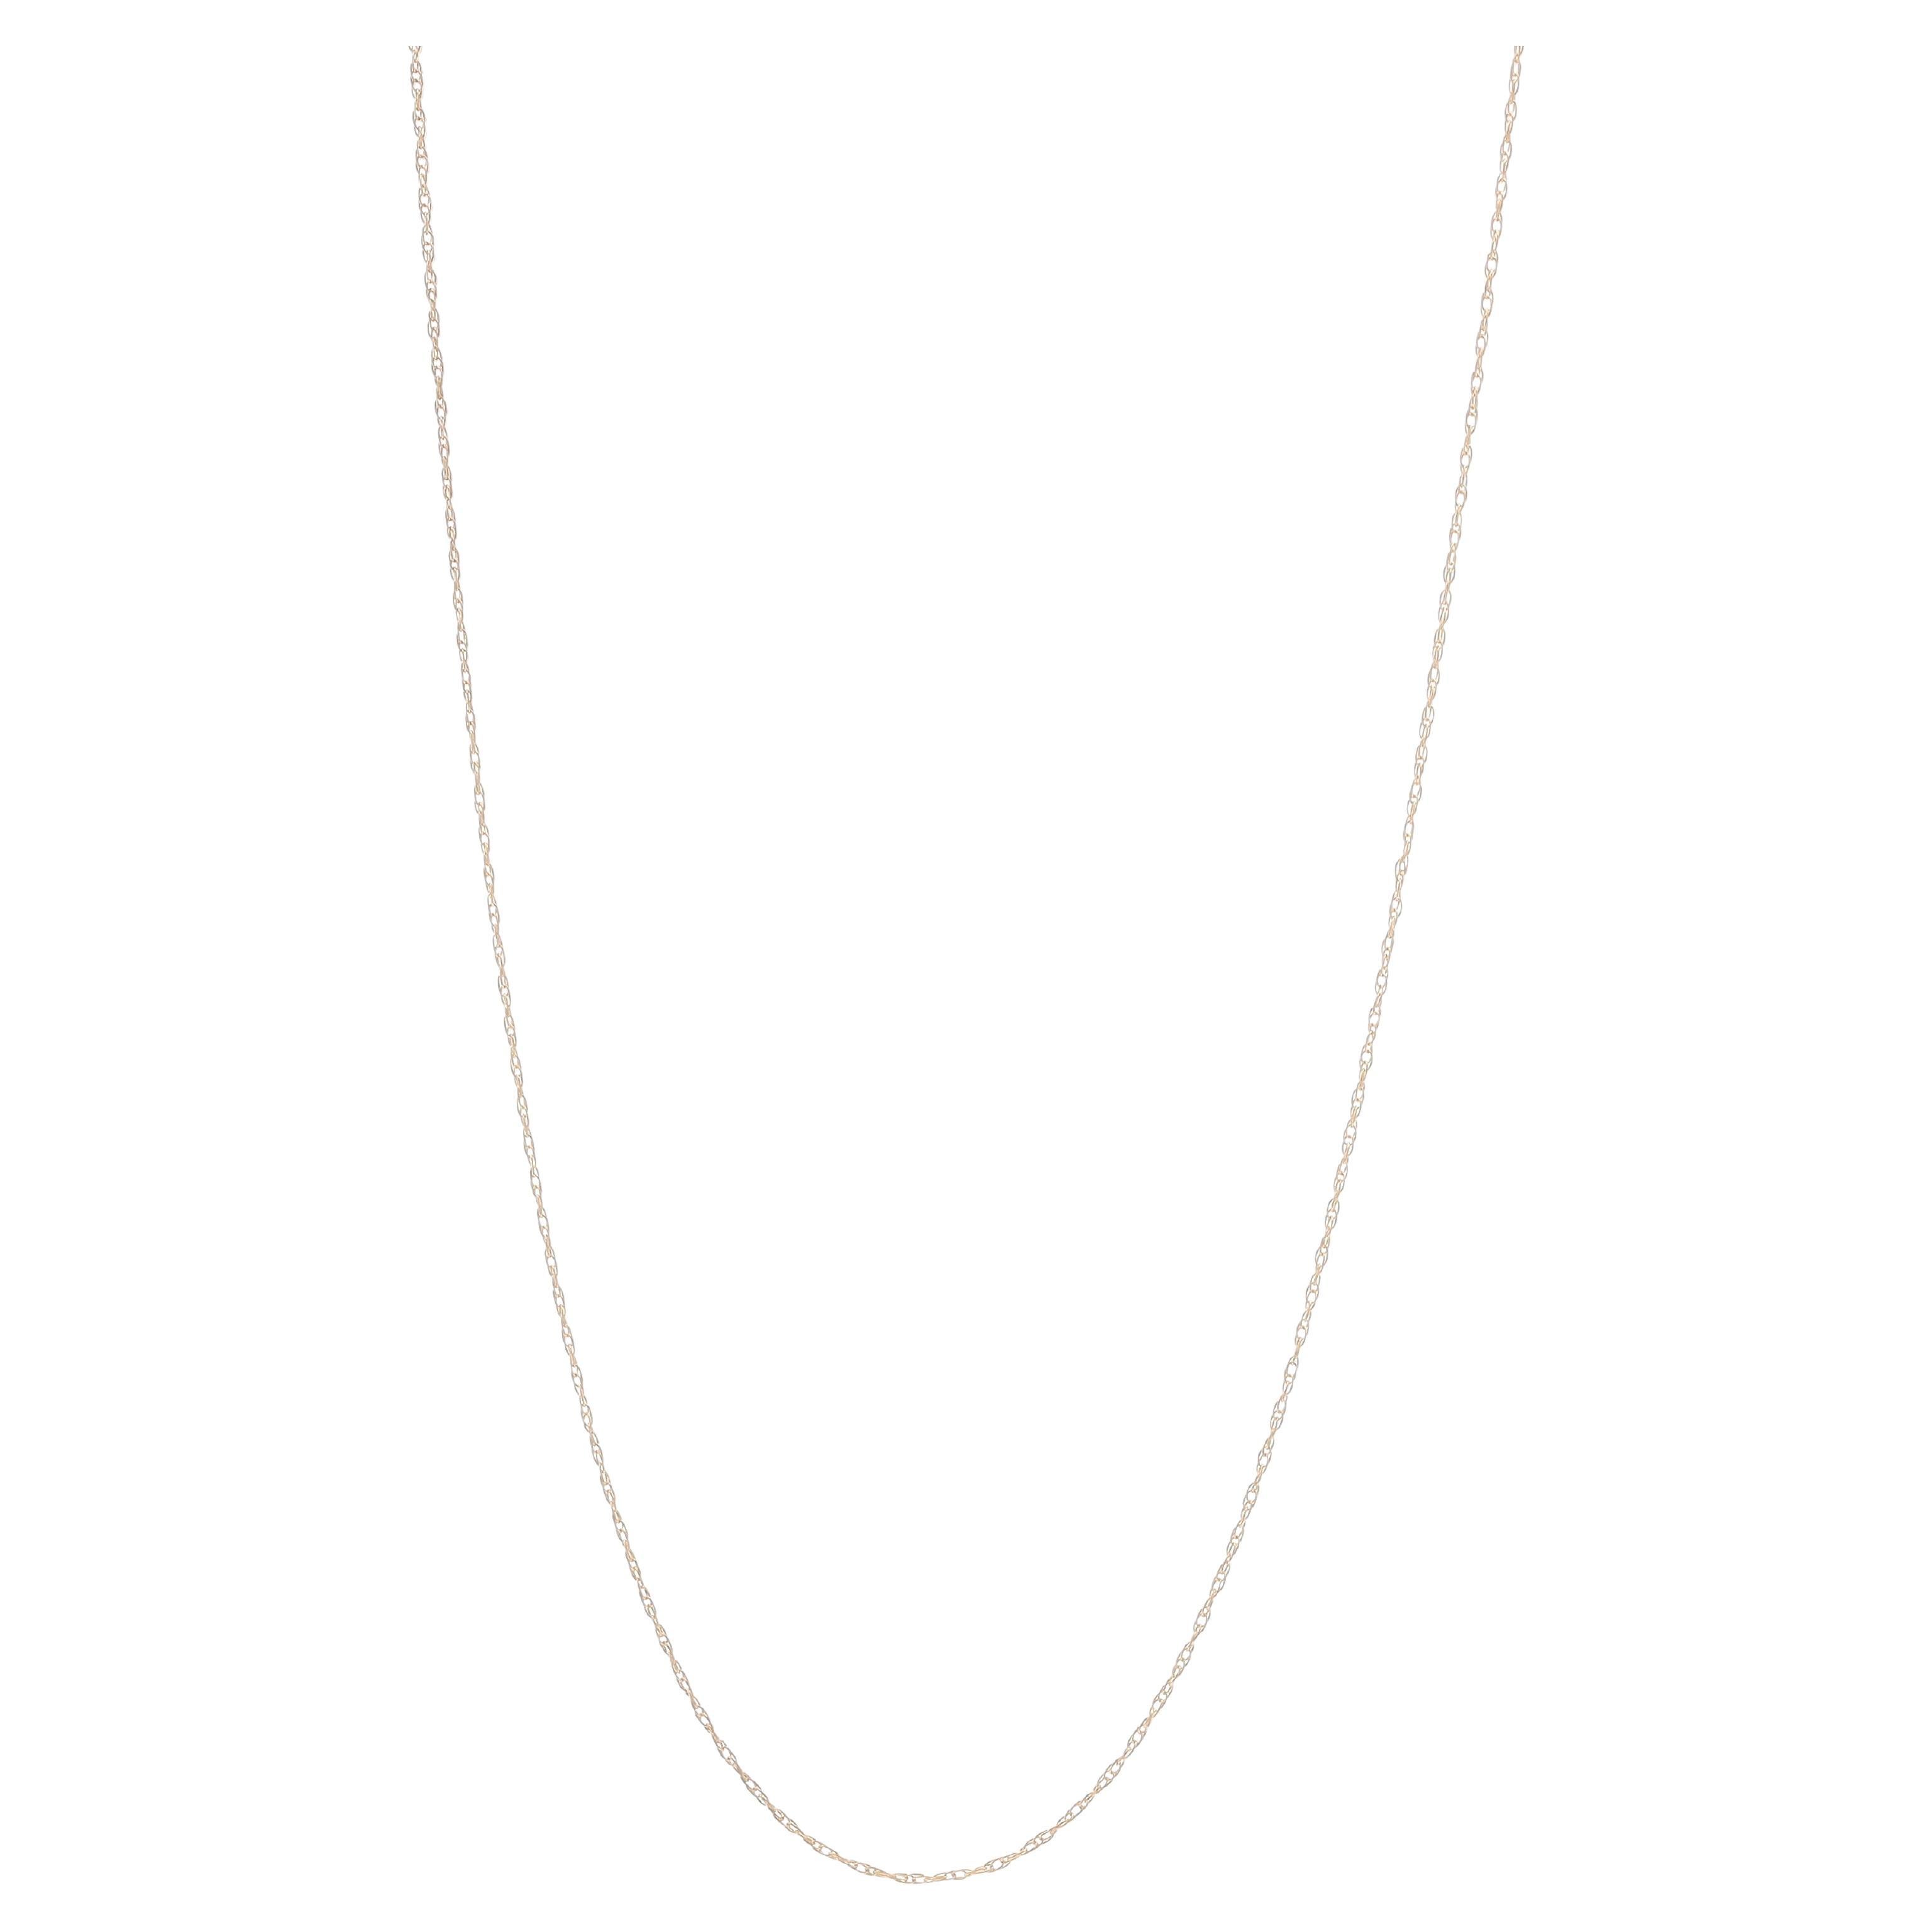 Yellow Gold Prince of Wales Chain Necklace 18 1/2" - 14k